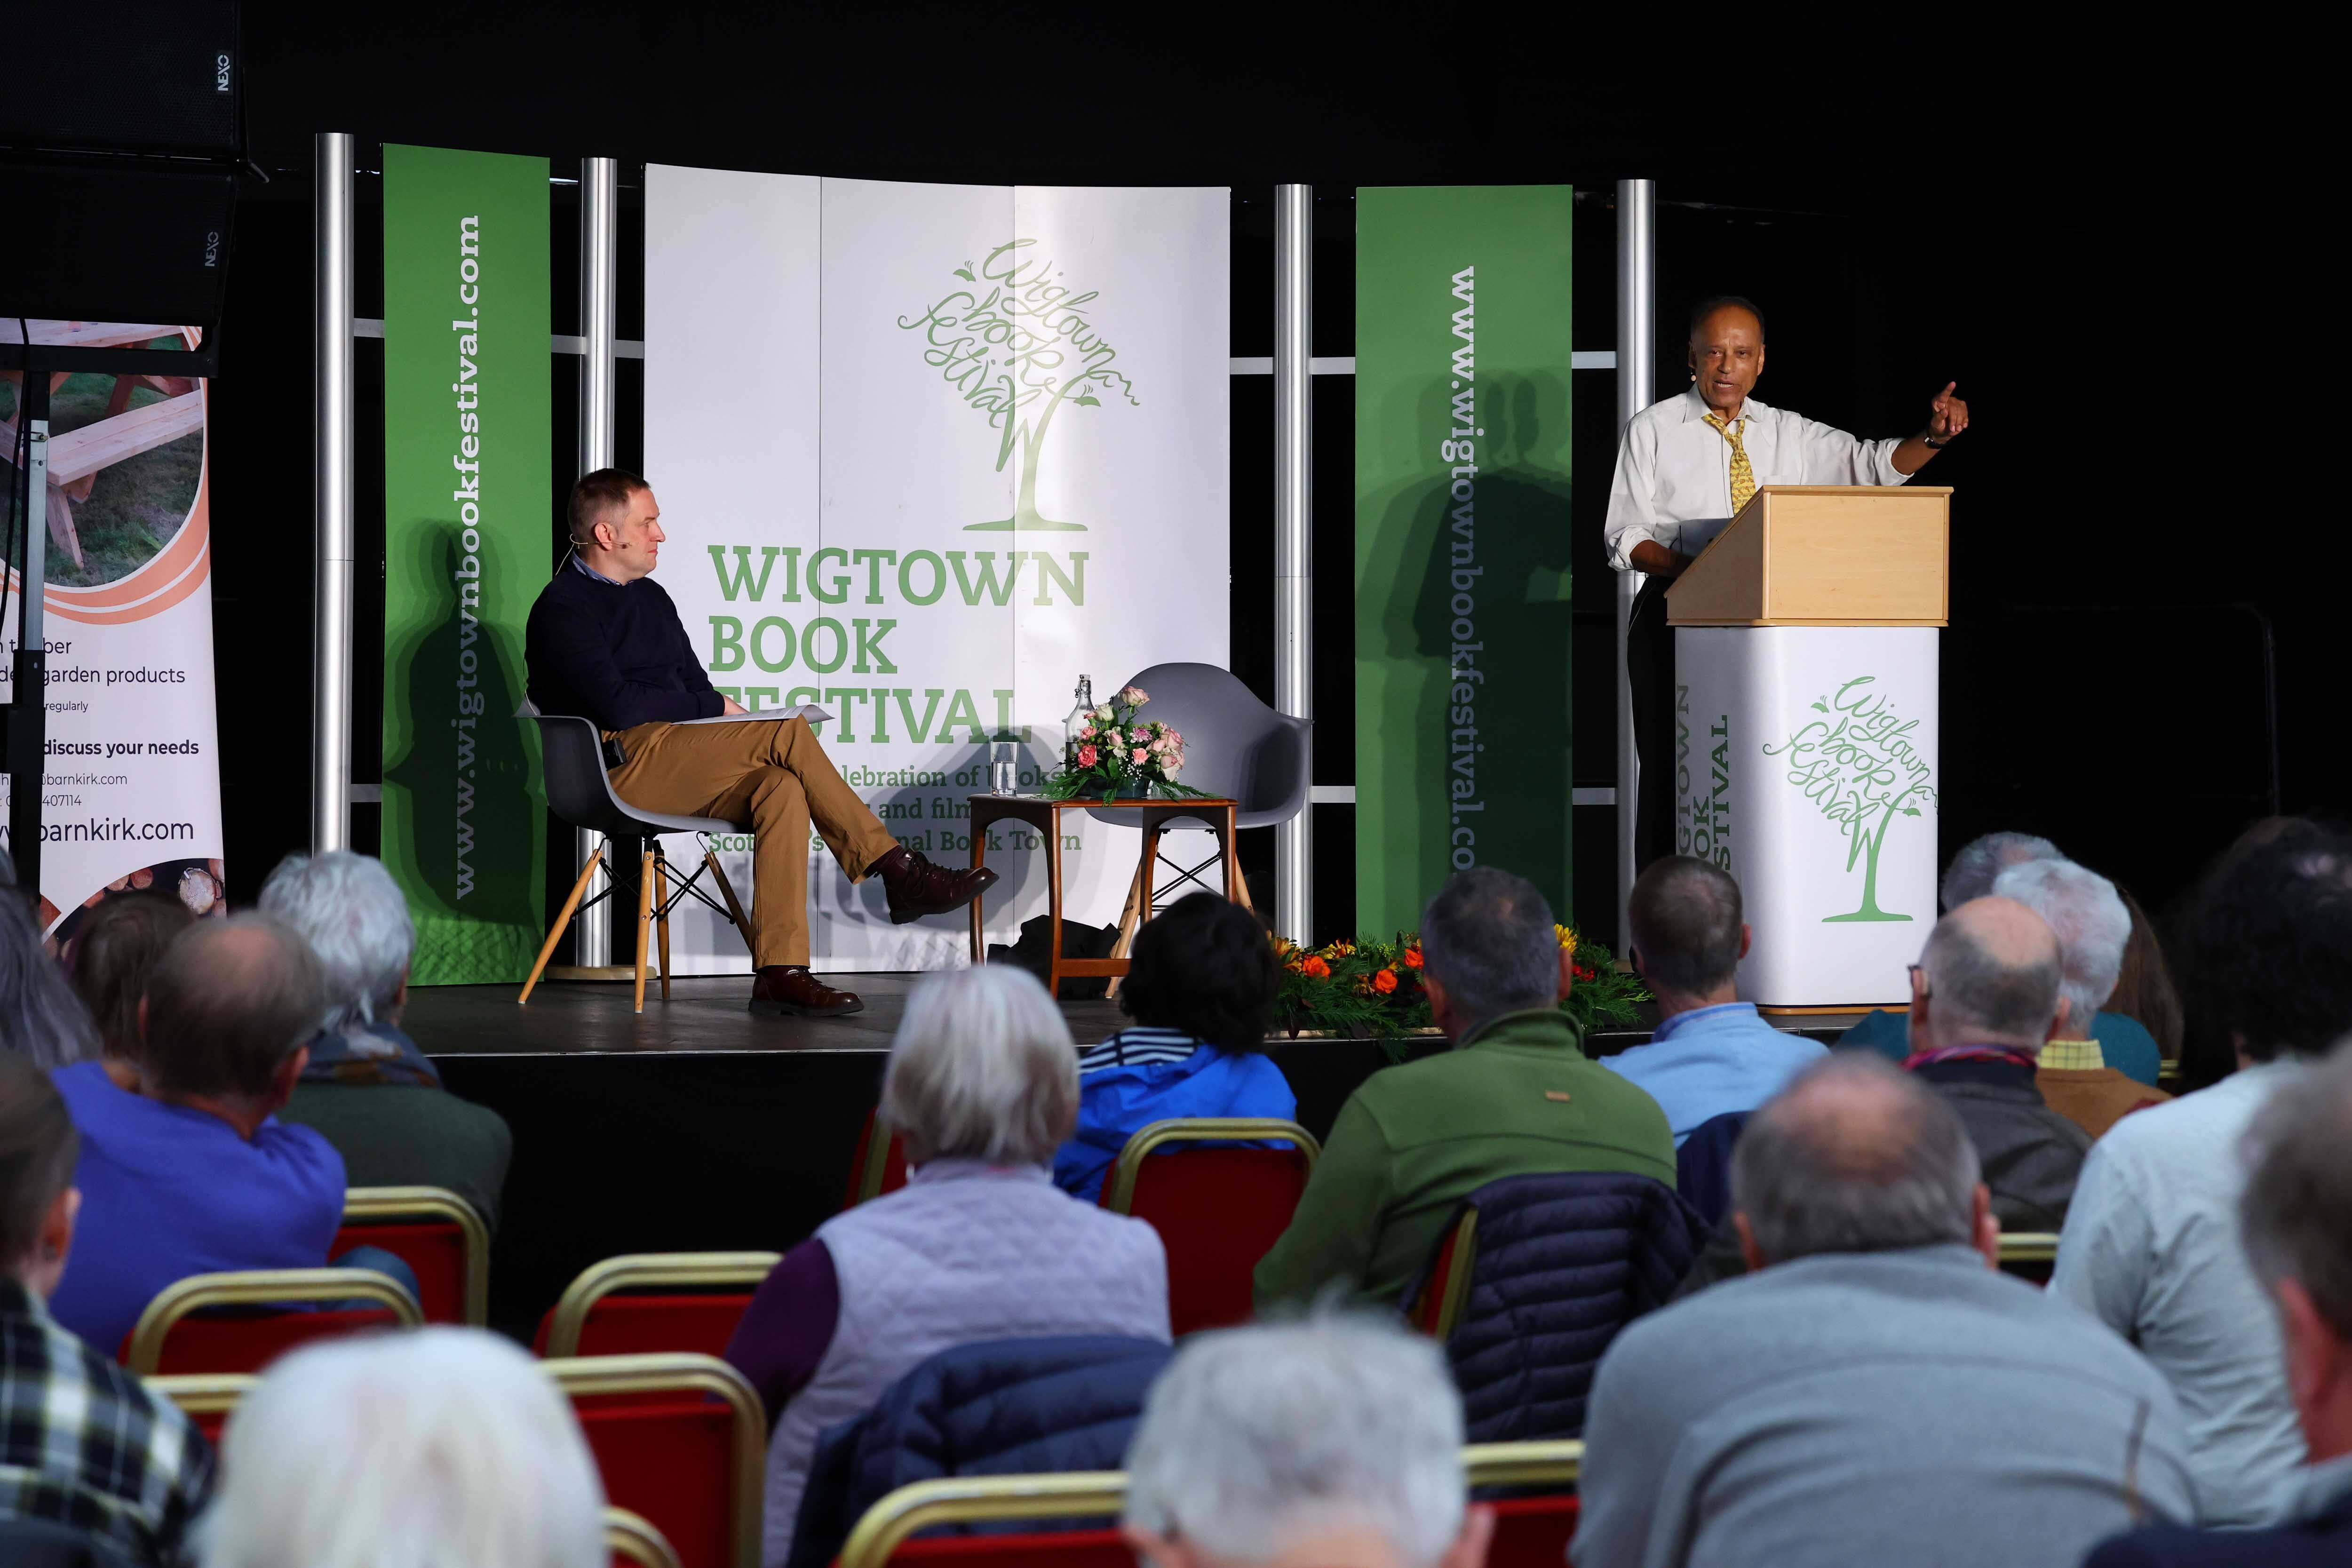 Professor Sir Partha Dasgupta speaks from behind a lectern on stage at Wigtown Book Festival. Chair Graeme Stewart sits in a chair across the stage in front of a Wigtown Book Festival Banner. Audience members are in view in the foreground.